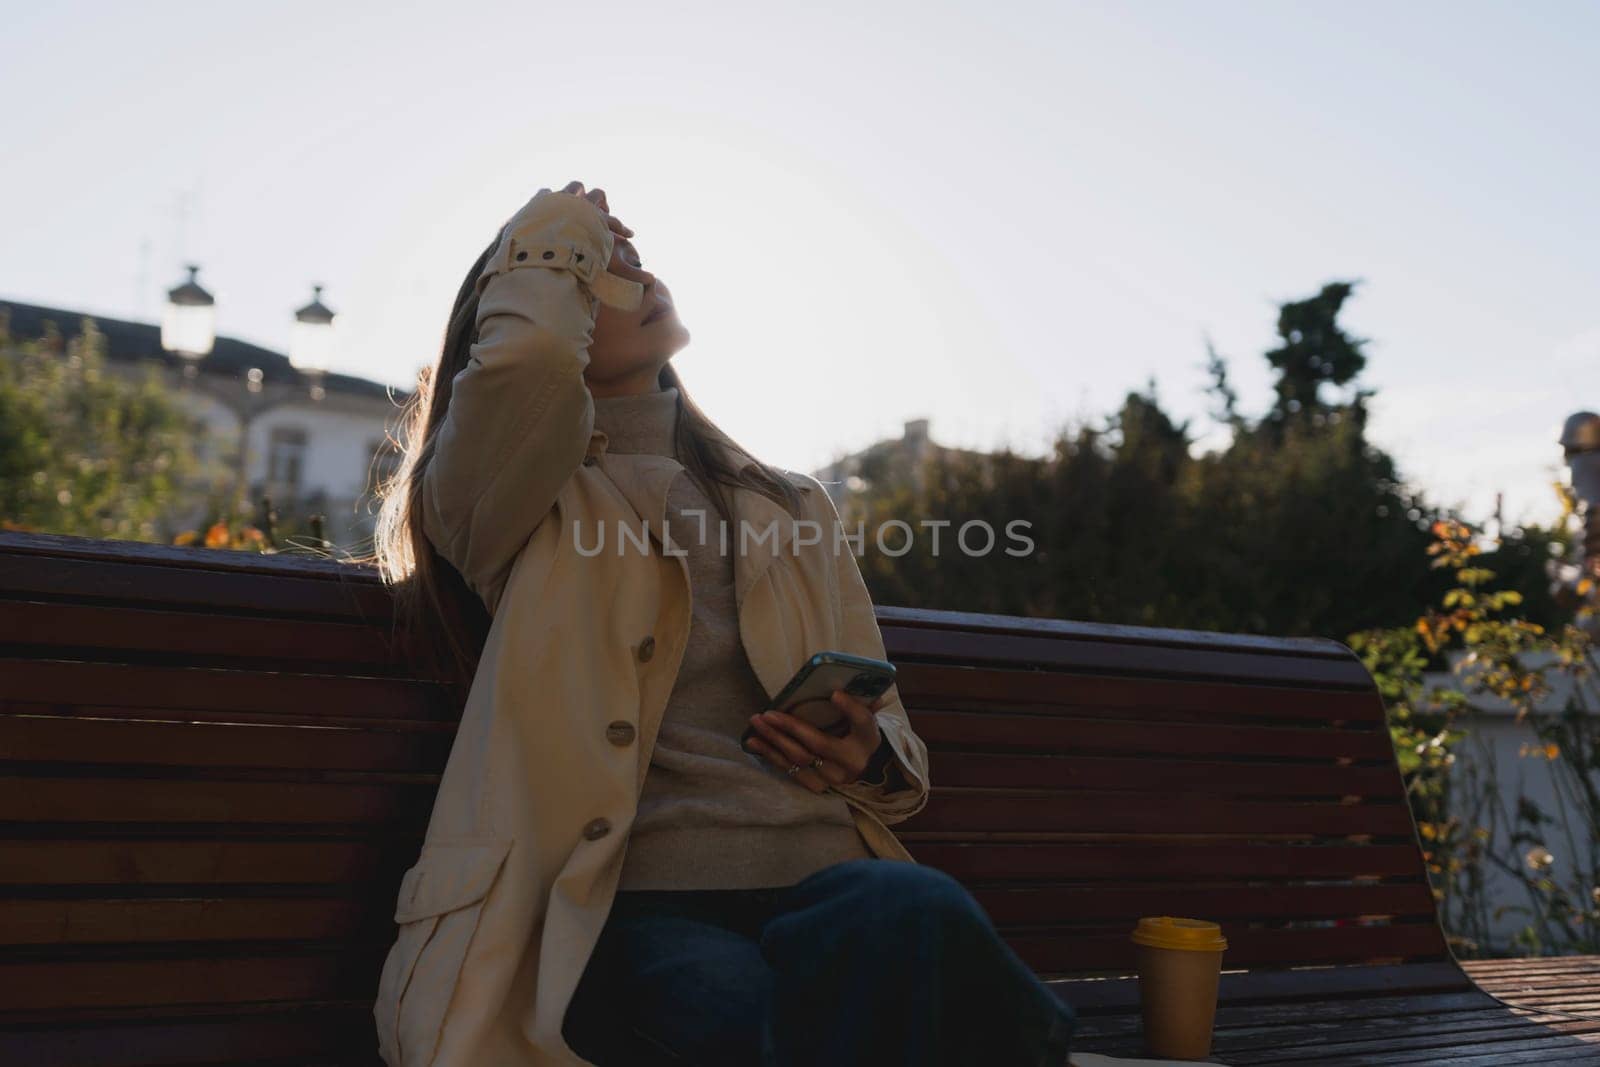 A woman sitting on a bench with her hand on her face. She is wearing a tan coat and holding a cell phone